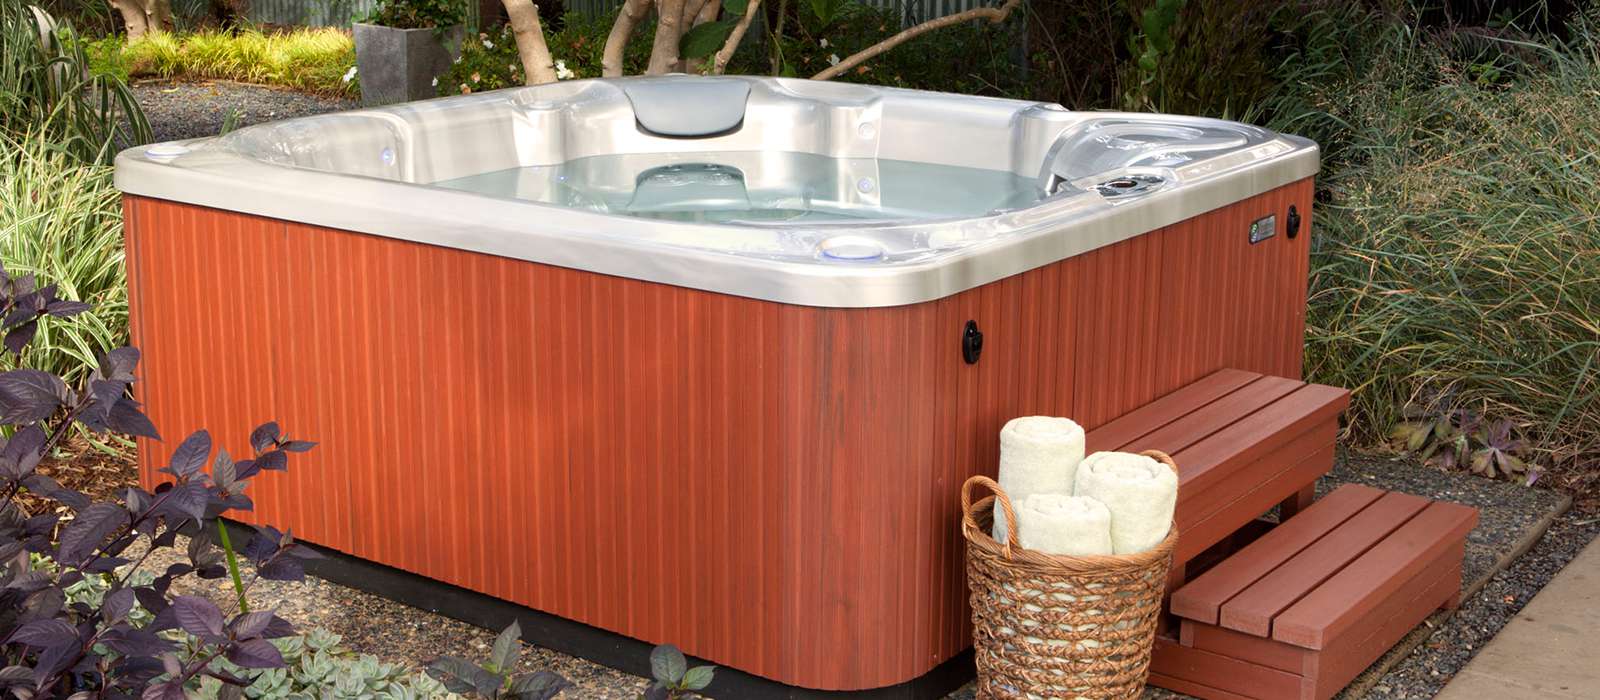 Relax in style with the Bolt hot tub, featuring a sleek cabinet profile and elegant flowing shell. Add spa steps to make it easy for everyone to get in and out of the spa.